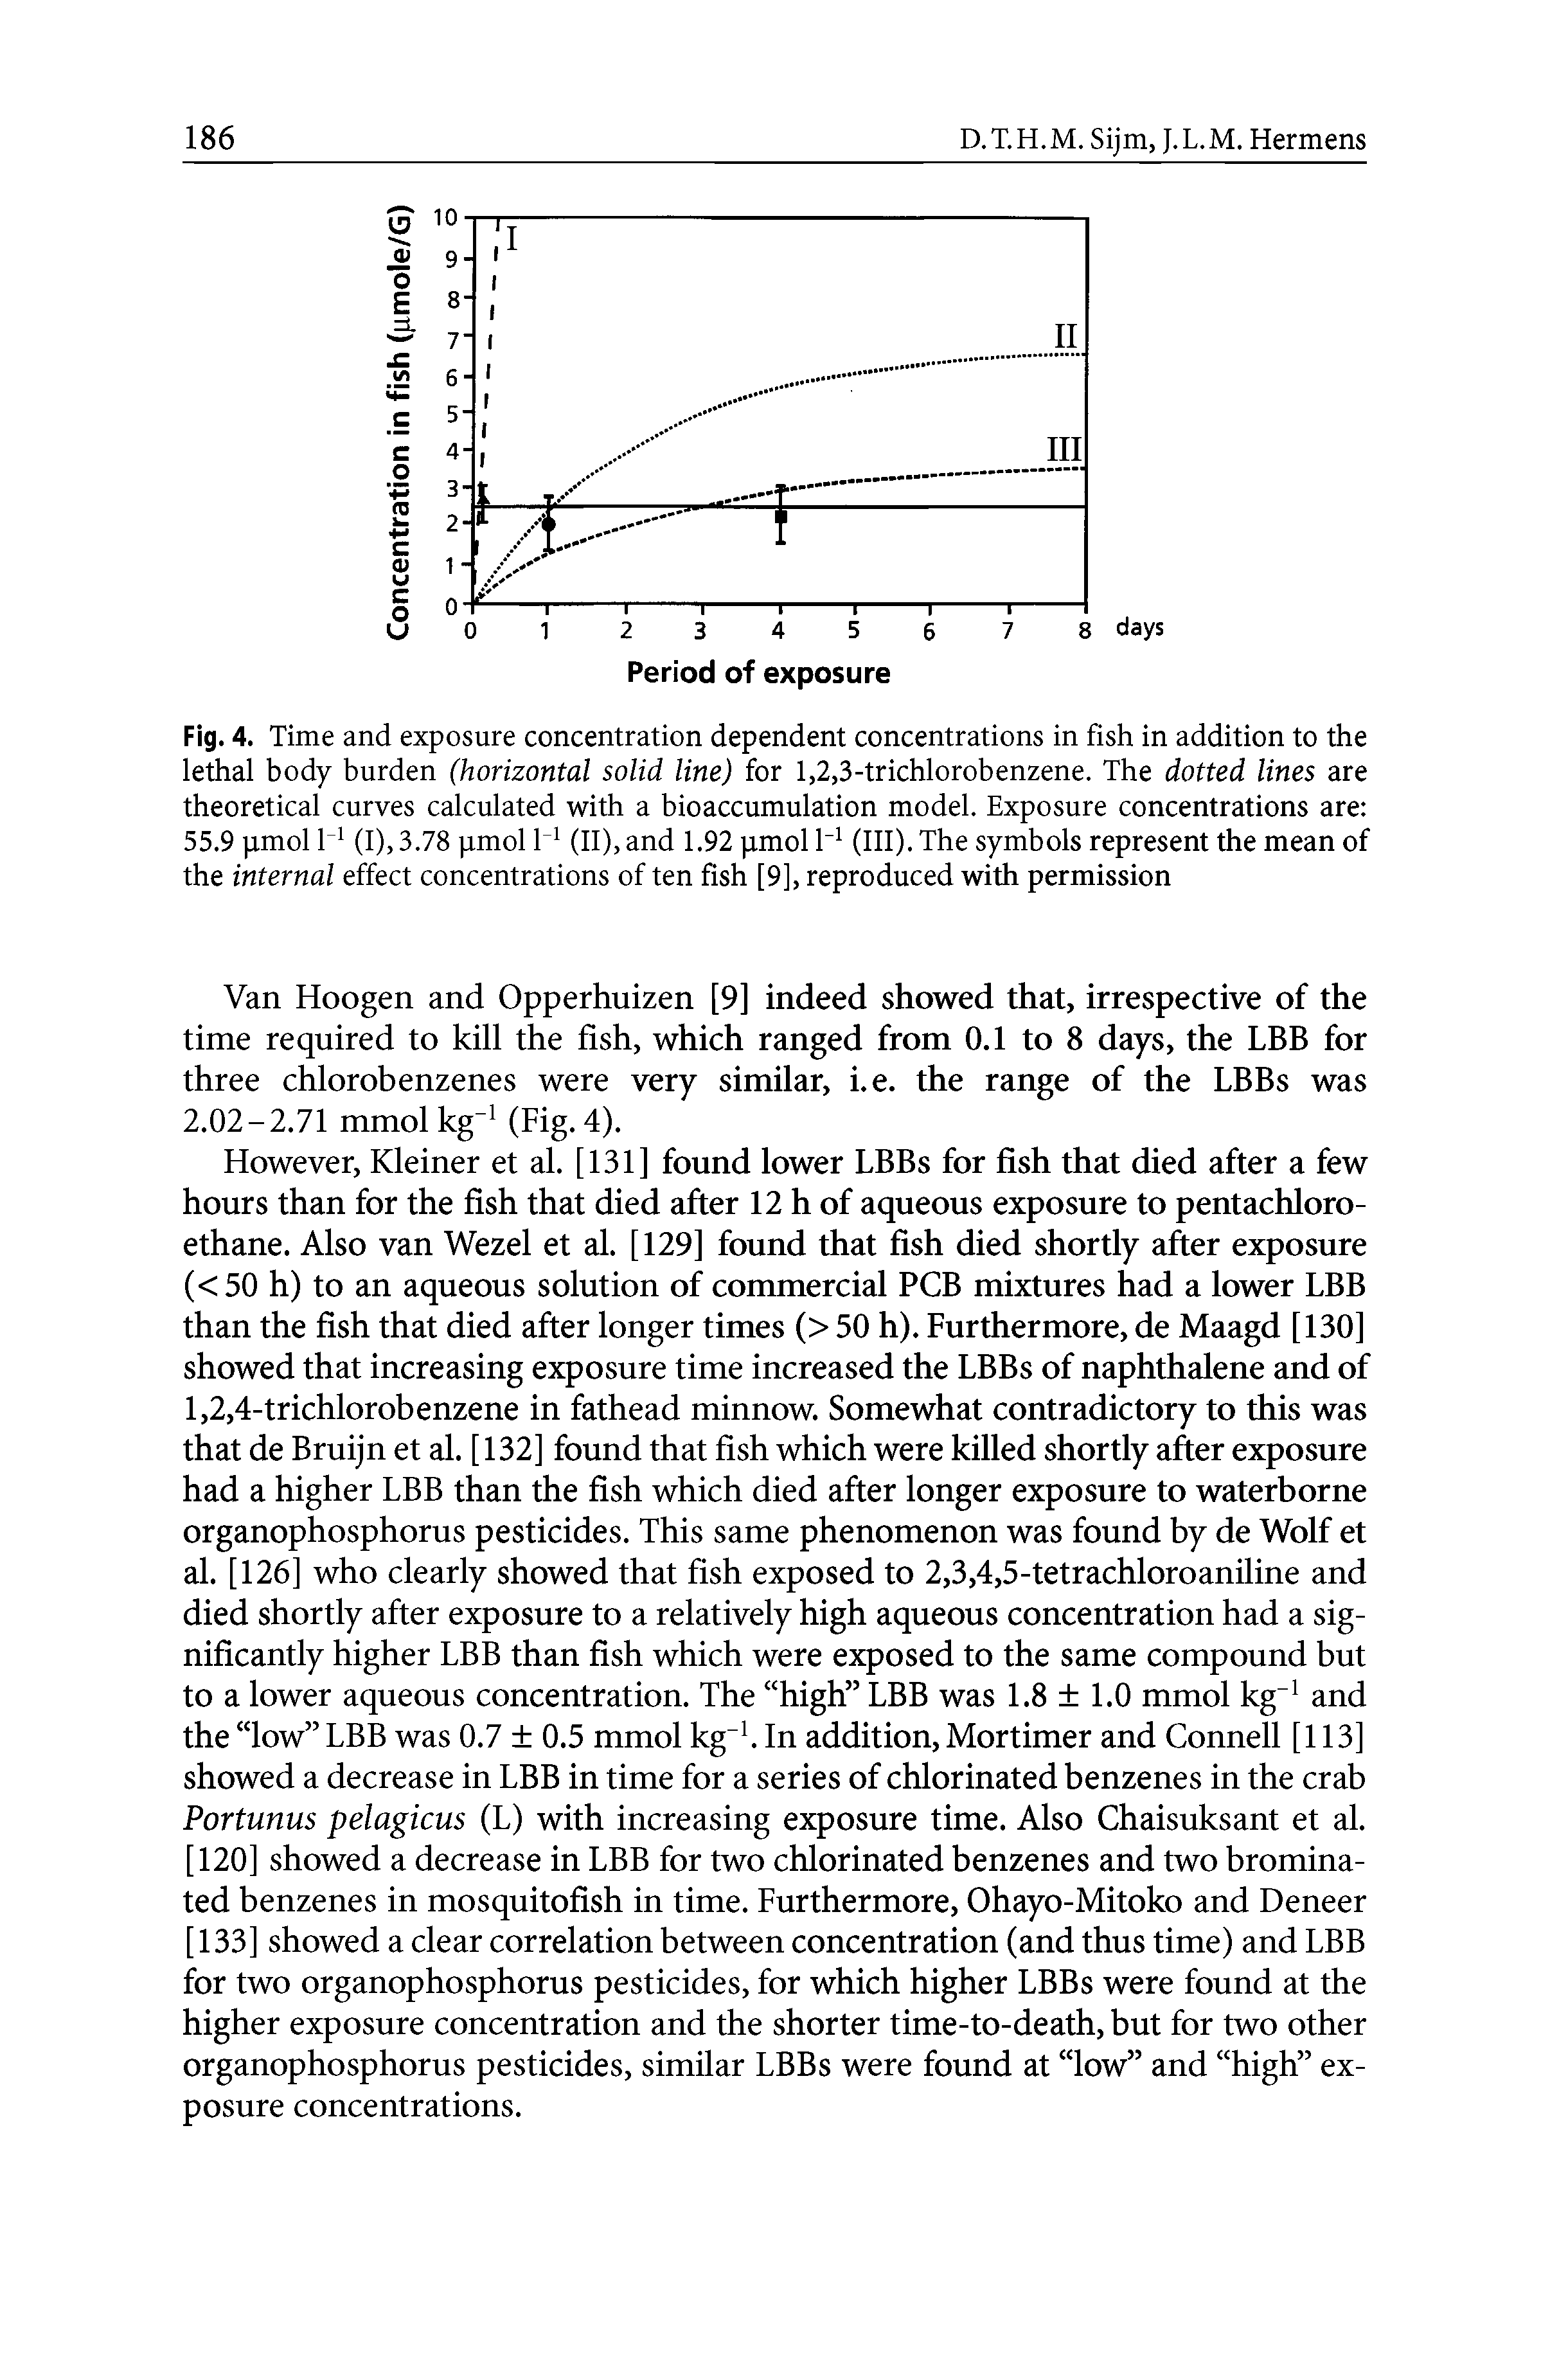 Fig. 4. Time and exposure concentration dependent concentrations in fish in addition to the lethal body burden (horizontal solid line) for 1,2,3-trichlorobenzene. The dotted lines are theoretical curves calculated with a bioaccumulation model. Exposure concentrations are 55.9 pmol 1 (I), 3.78 pmol (II), and 1.92 pmol (III). The symbols represent the mean of the internal effect concentrations of ten fish [9], reproduced with permission...